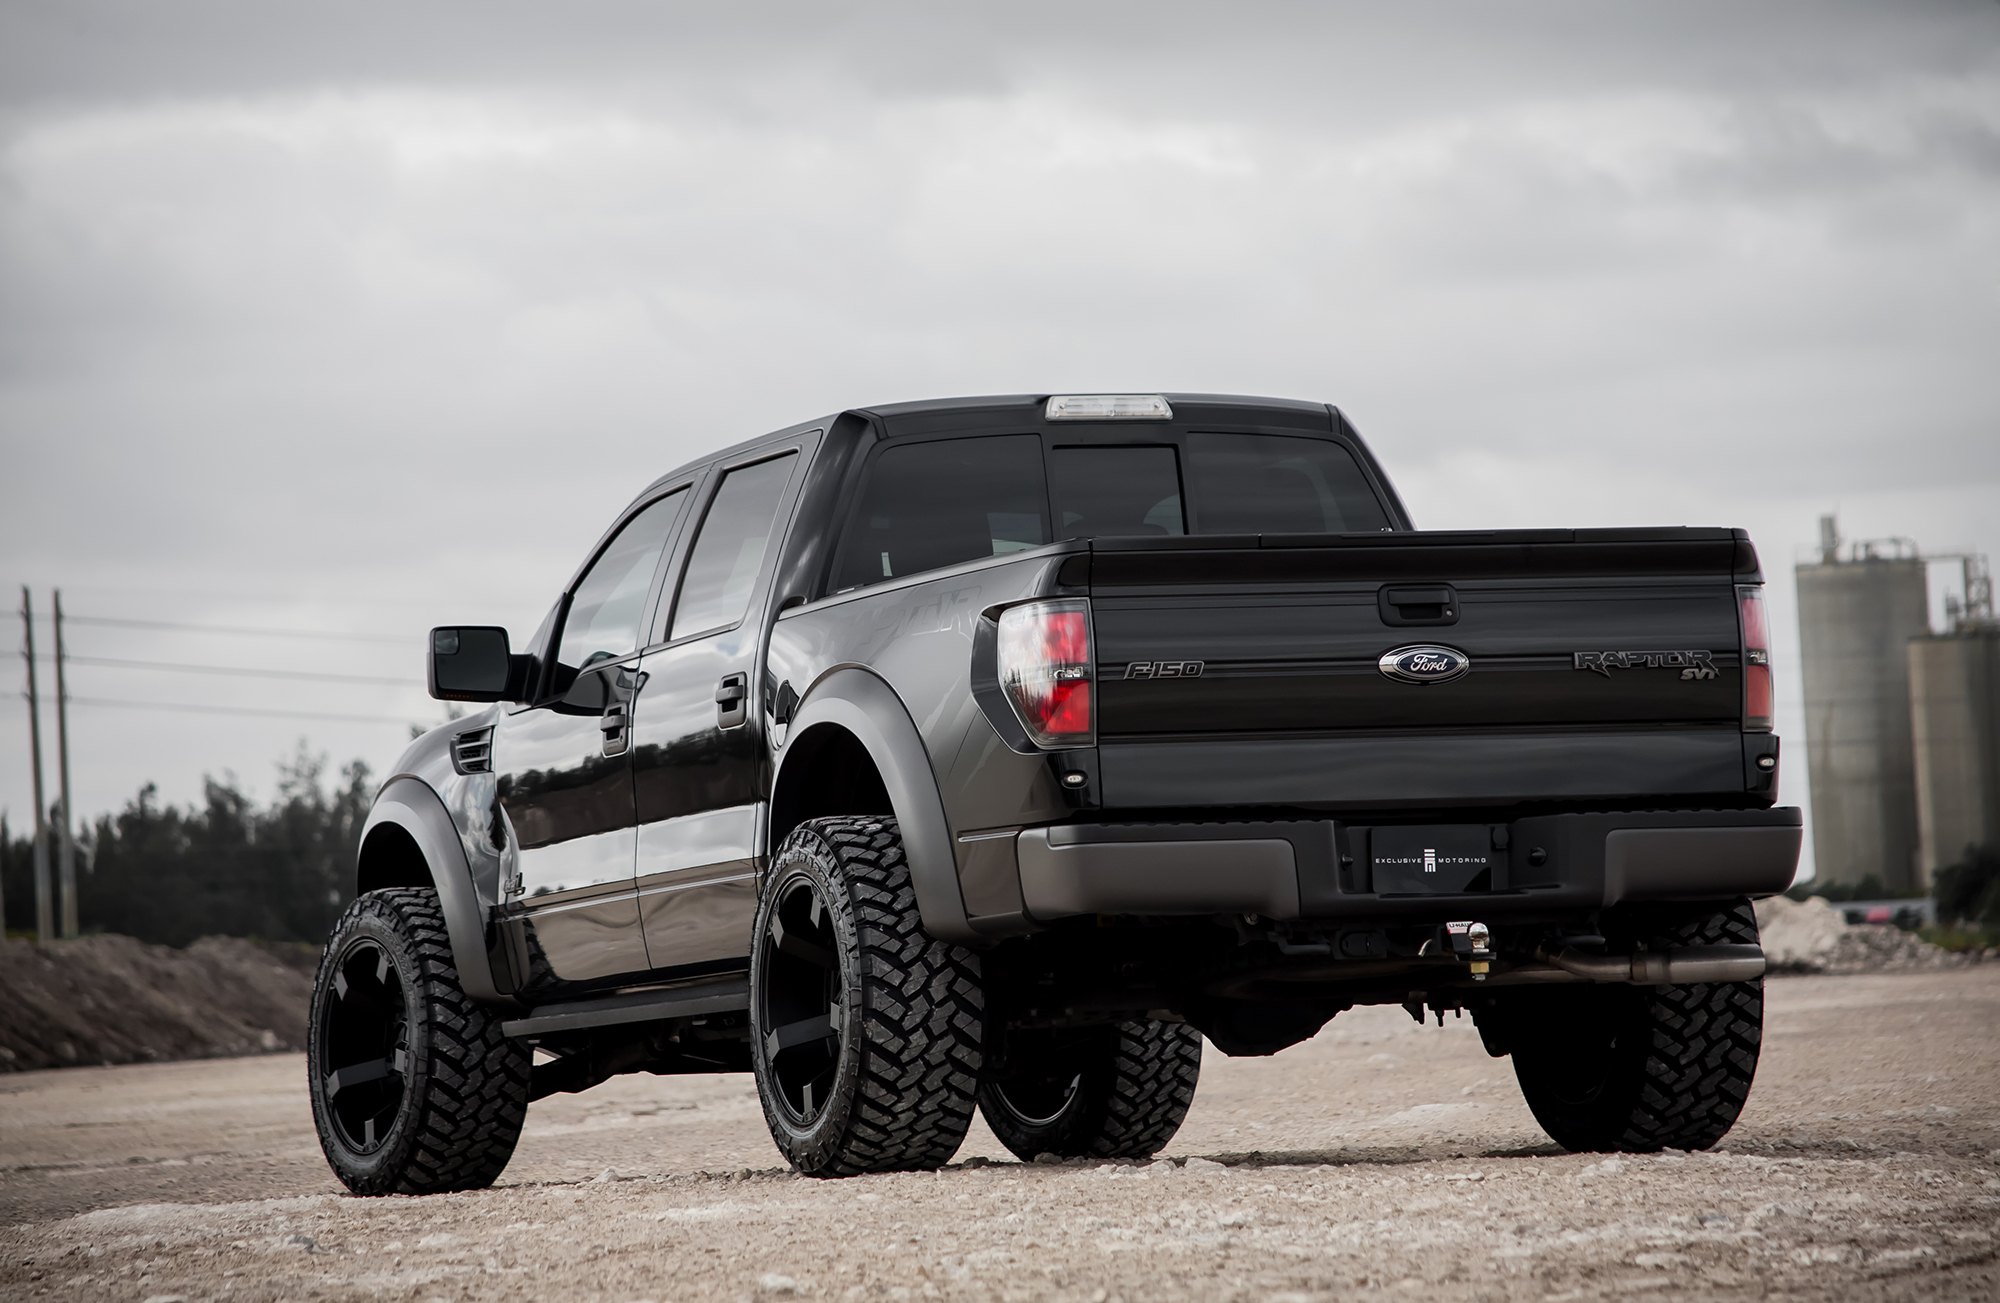 SVT Raptor With Wide Off-road Wheels - Photo by Exclusive Motoring